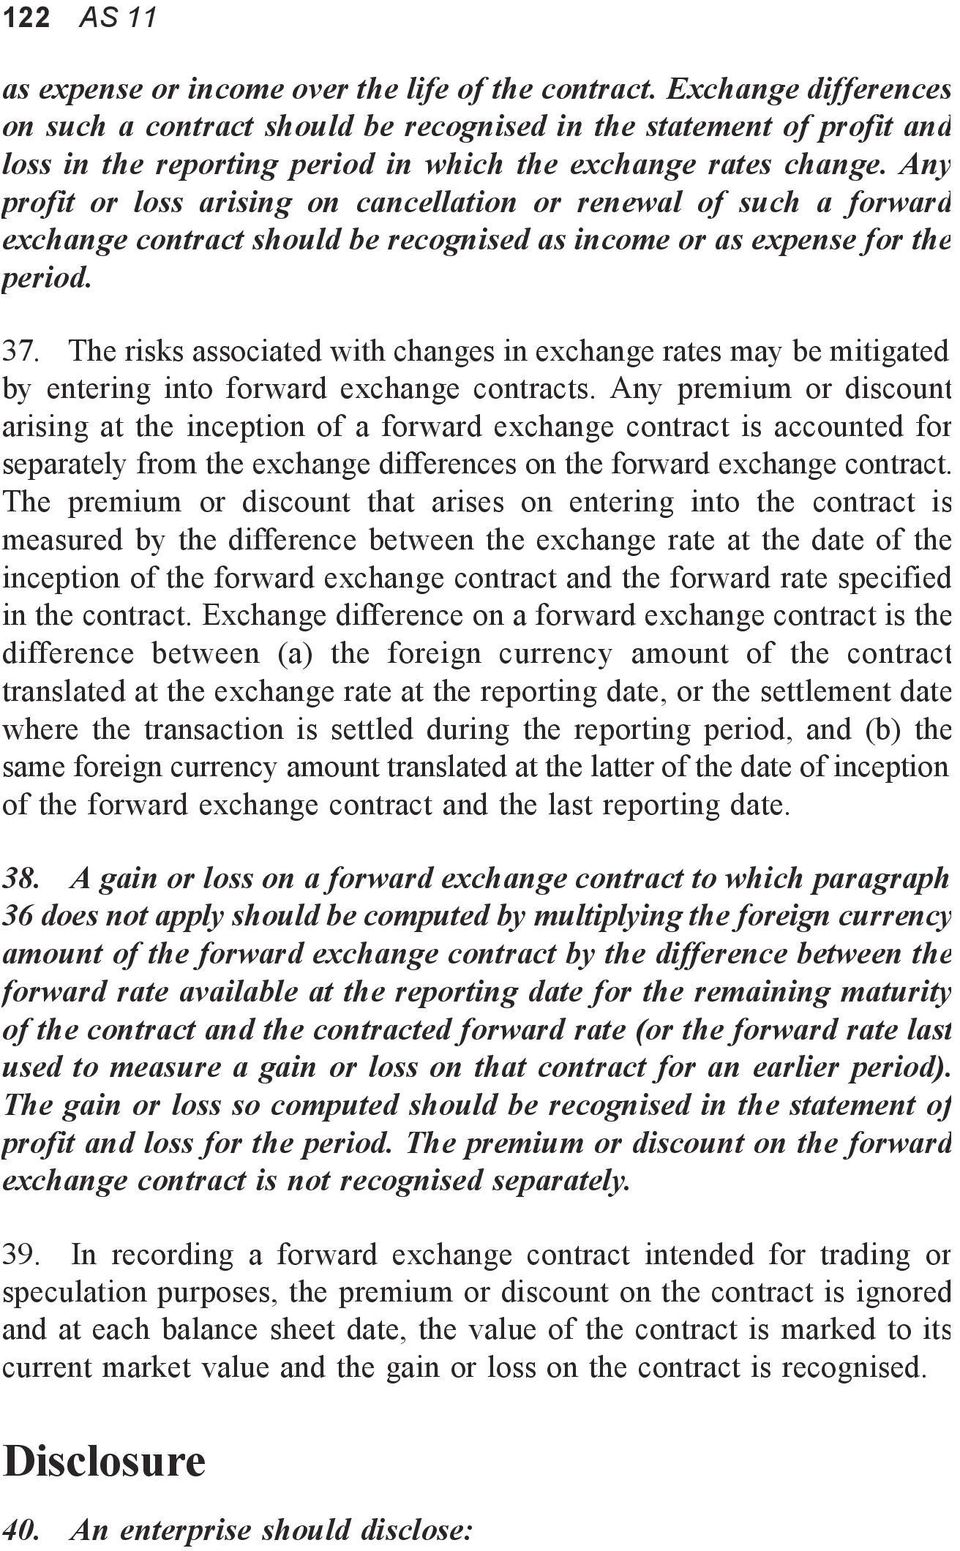 Any profit or loss arising on cancellation or renewal of such a forward exchange contract should be recognised as income or as expense for the period. 37.